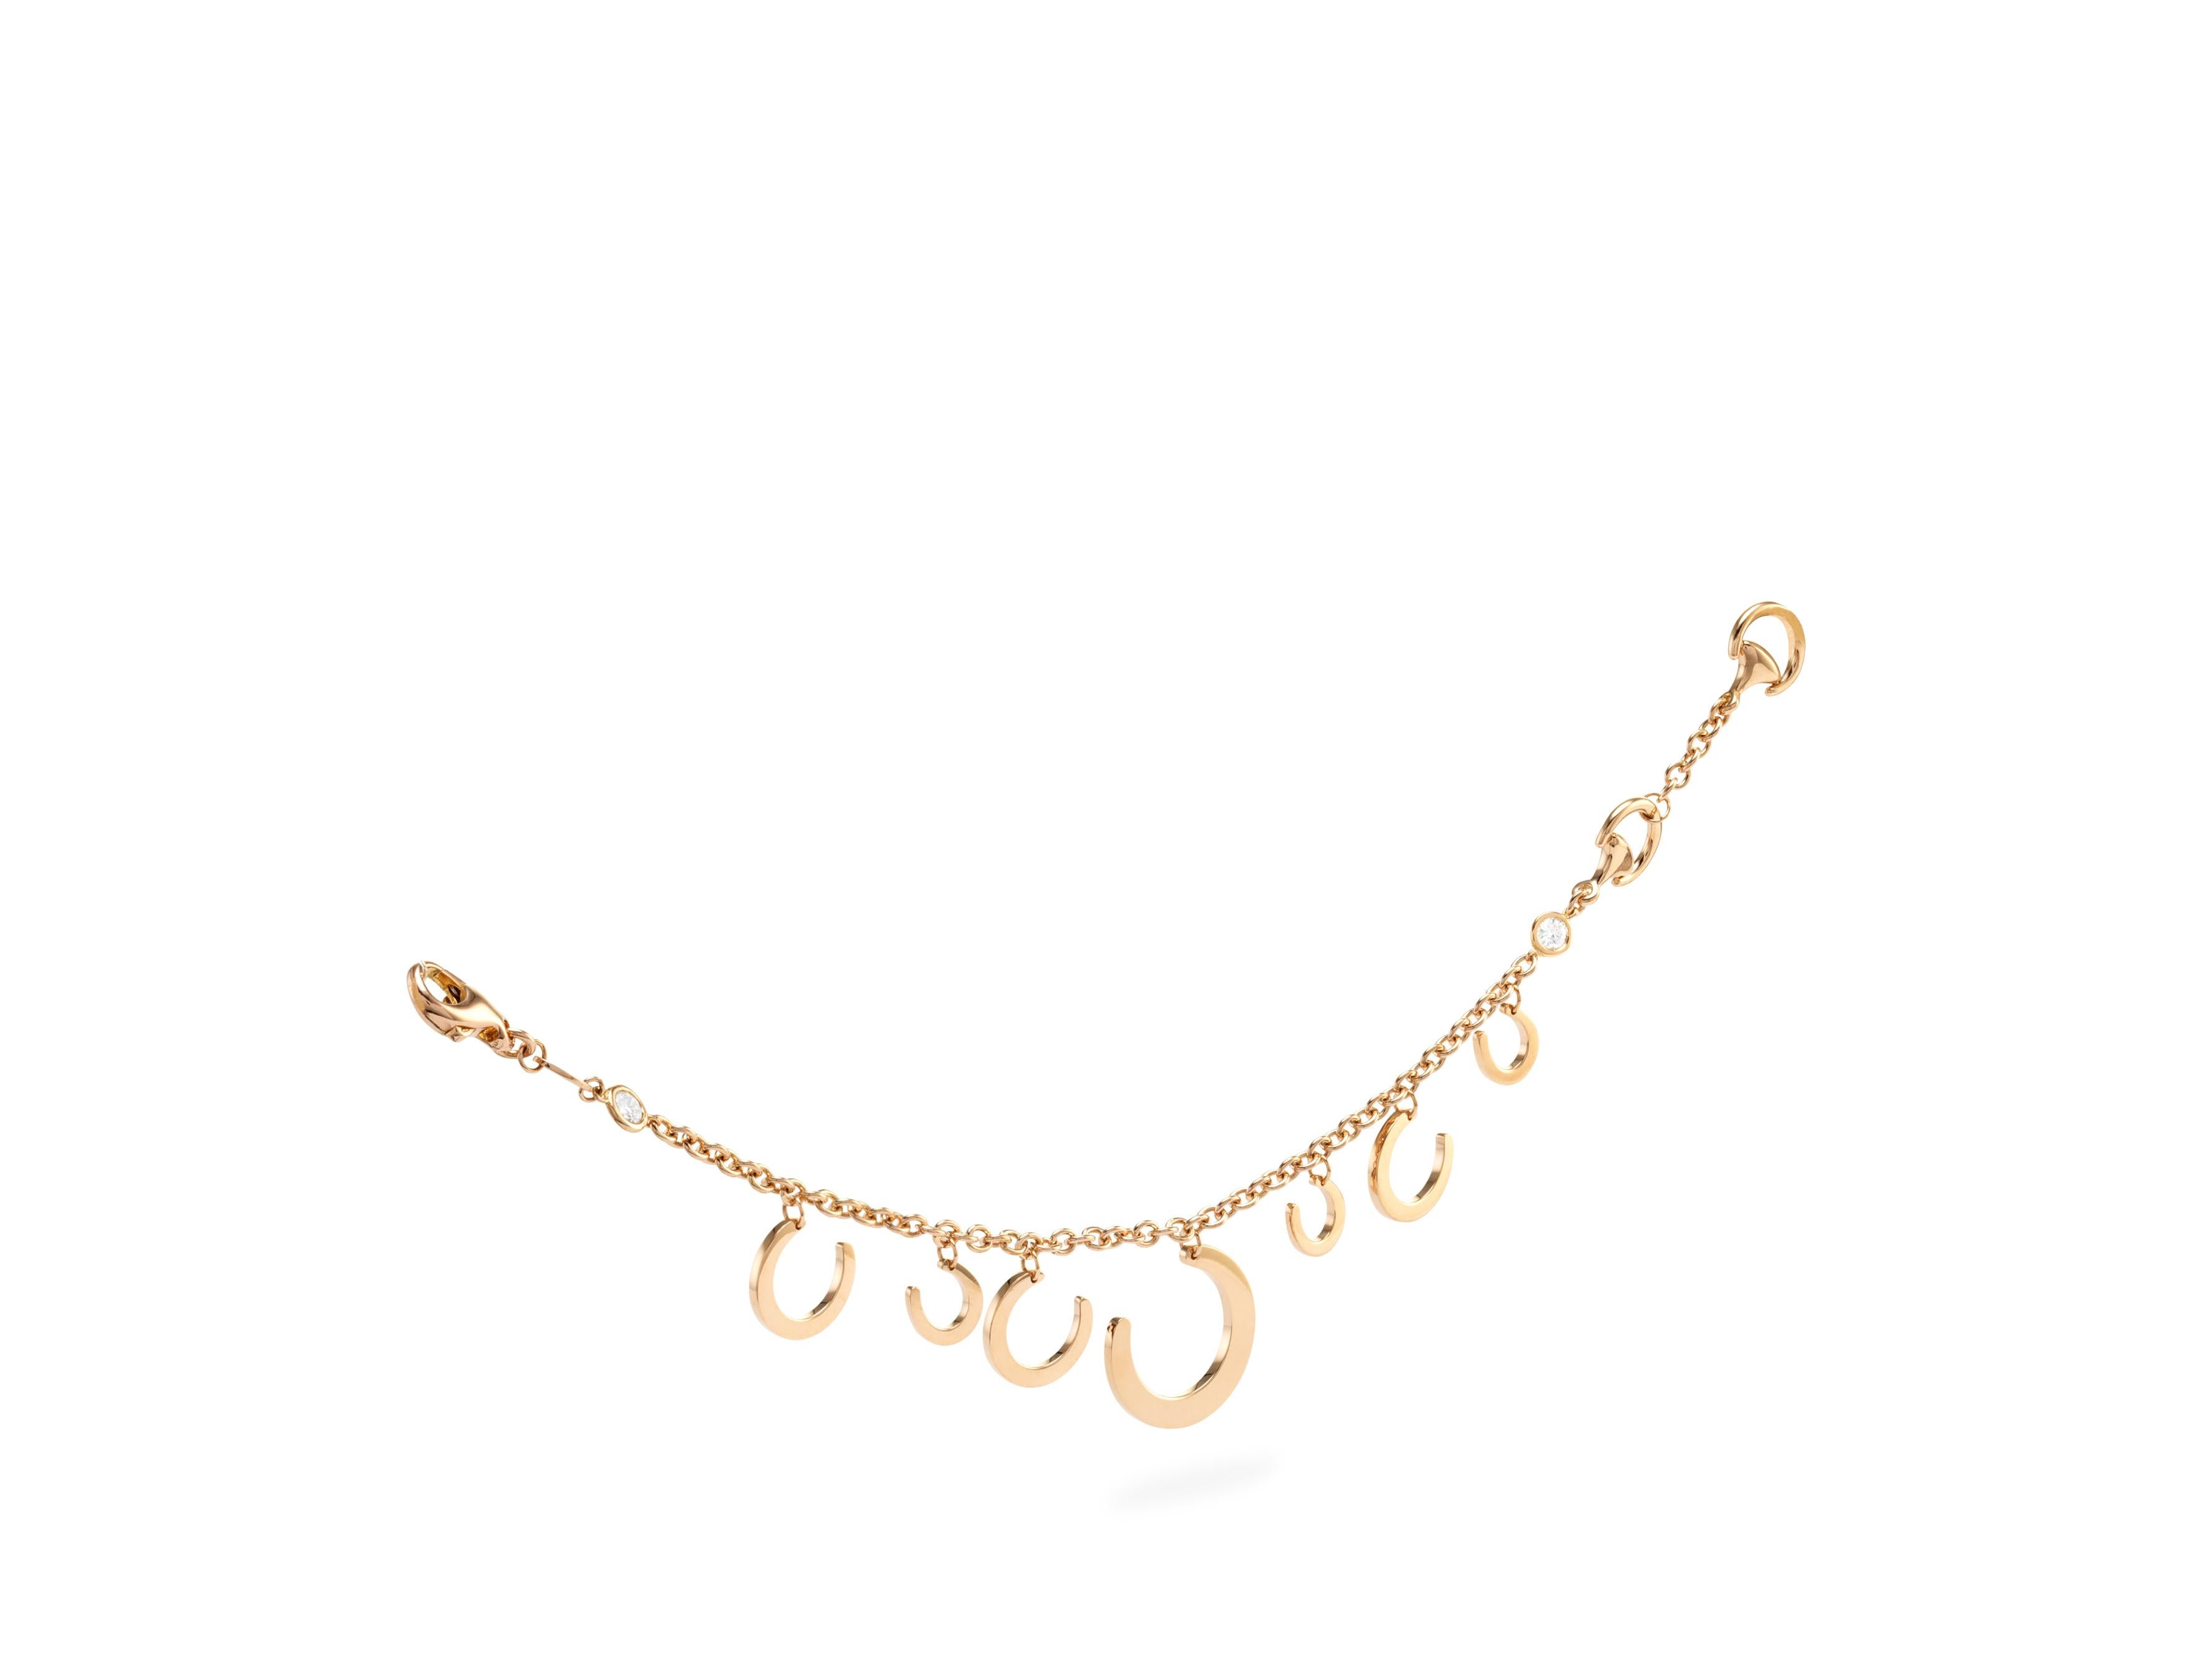 here we propose an Handmade in Italy,  Ubaldi Gioielli,  Handcrafted “Horseshoe” bracelet made in rose gold 18k 
Rolo chain in rose gold 18k 

Two diamonds on the rolo chain, G color and VVS clarity, for a total Carat weight of 0.22 Ct.

The